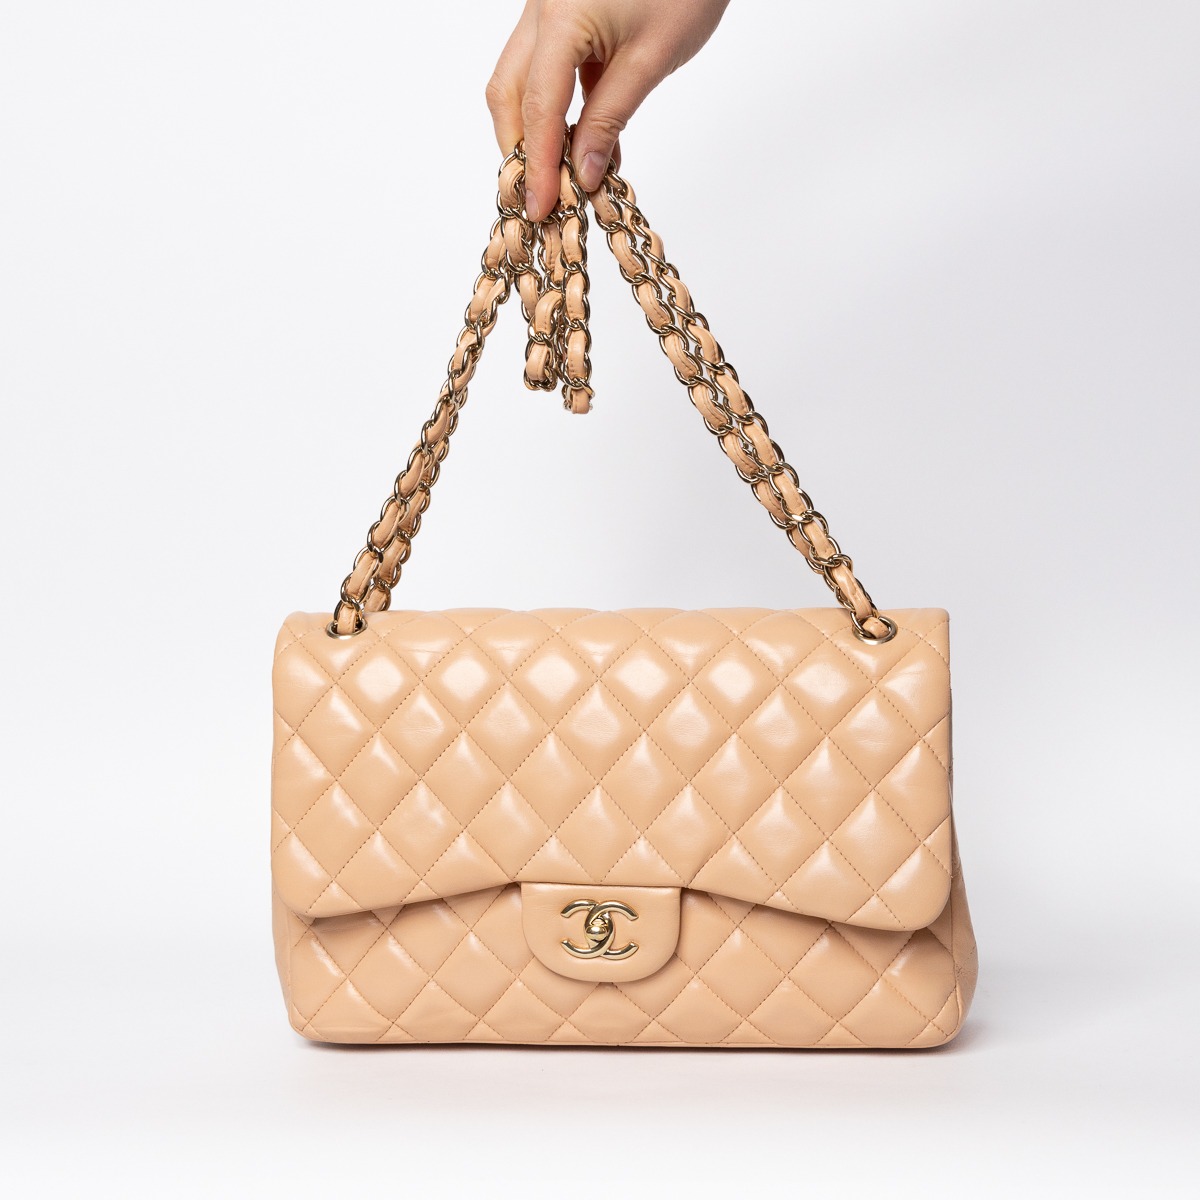 Chanel Double Flap Jumbo Bag Apricot bag with gold hardware